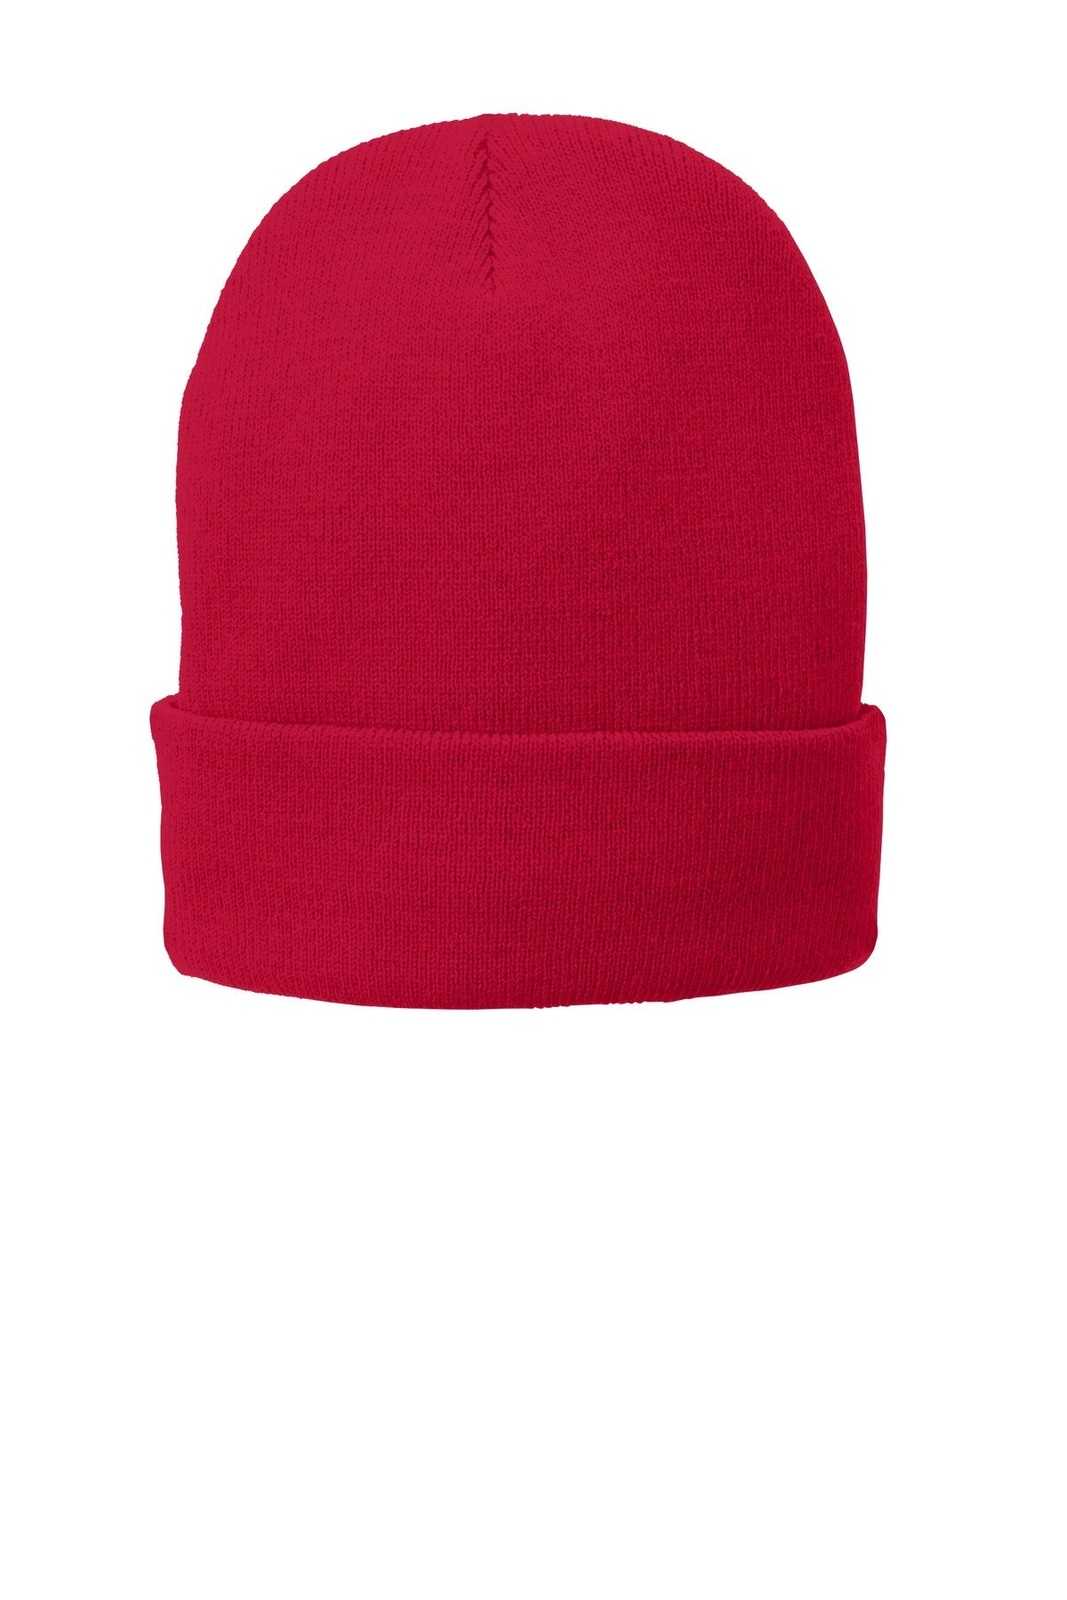 Port & Company CP90L Fleece-Lined Knit Cap with Cuff - Athletic Red - HIT a Double - 1